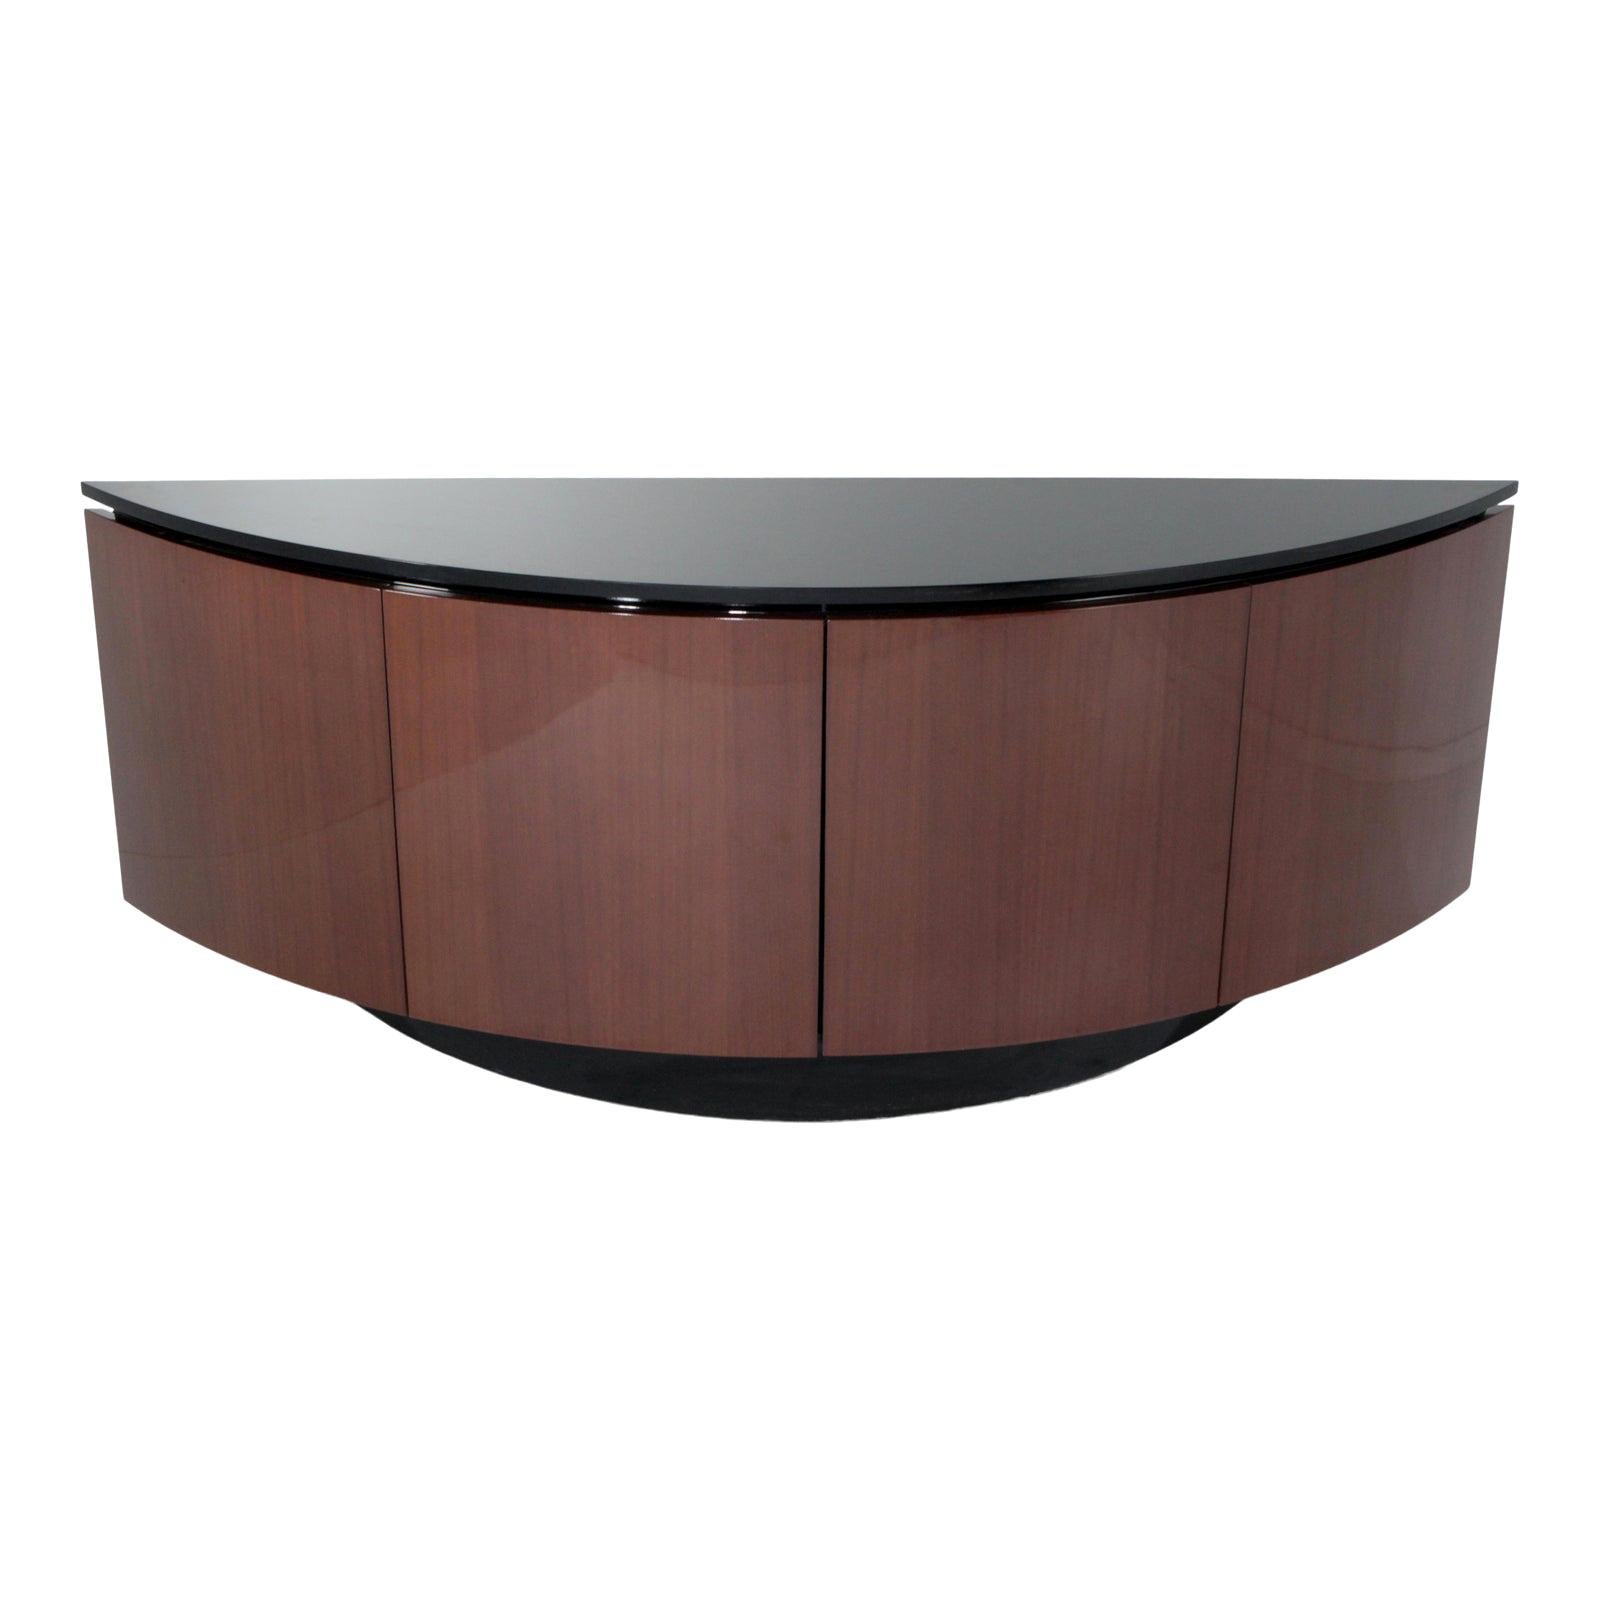 Italian Lacquer Crescent Shaped Credenza Sideboard Buffet Style of Ello